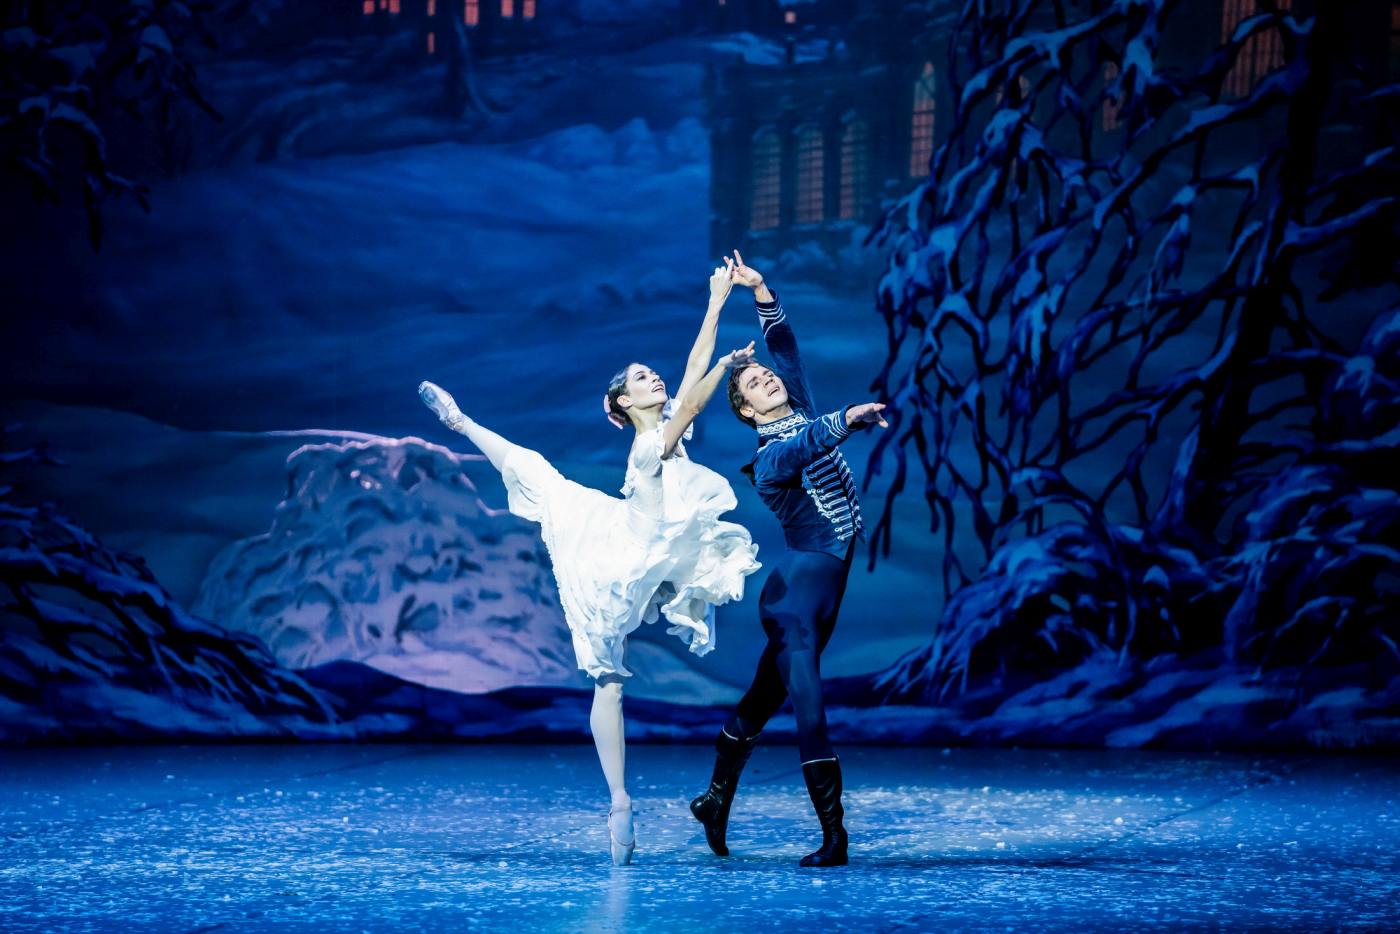 12. M.Yakovleva (Marie) and D.Tomofeev (Prince), “The Nutcracker” by W.Eagling and T.Solymosi, Hungarian National Ballet & Hungarian National Ballet Institute 2022 © V.Berecz